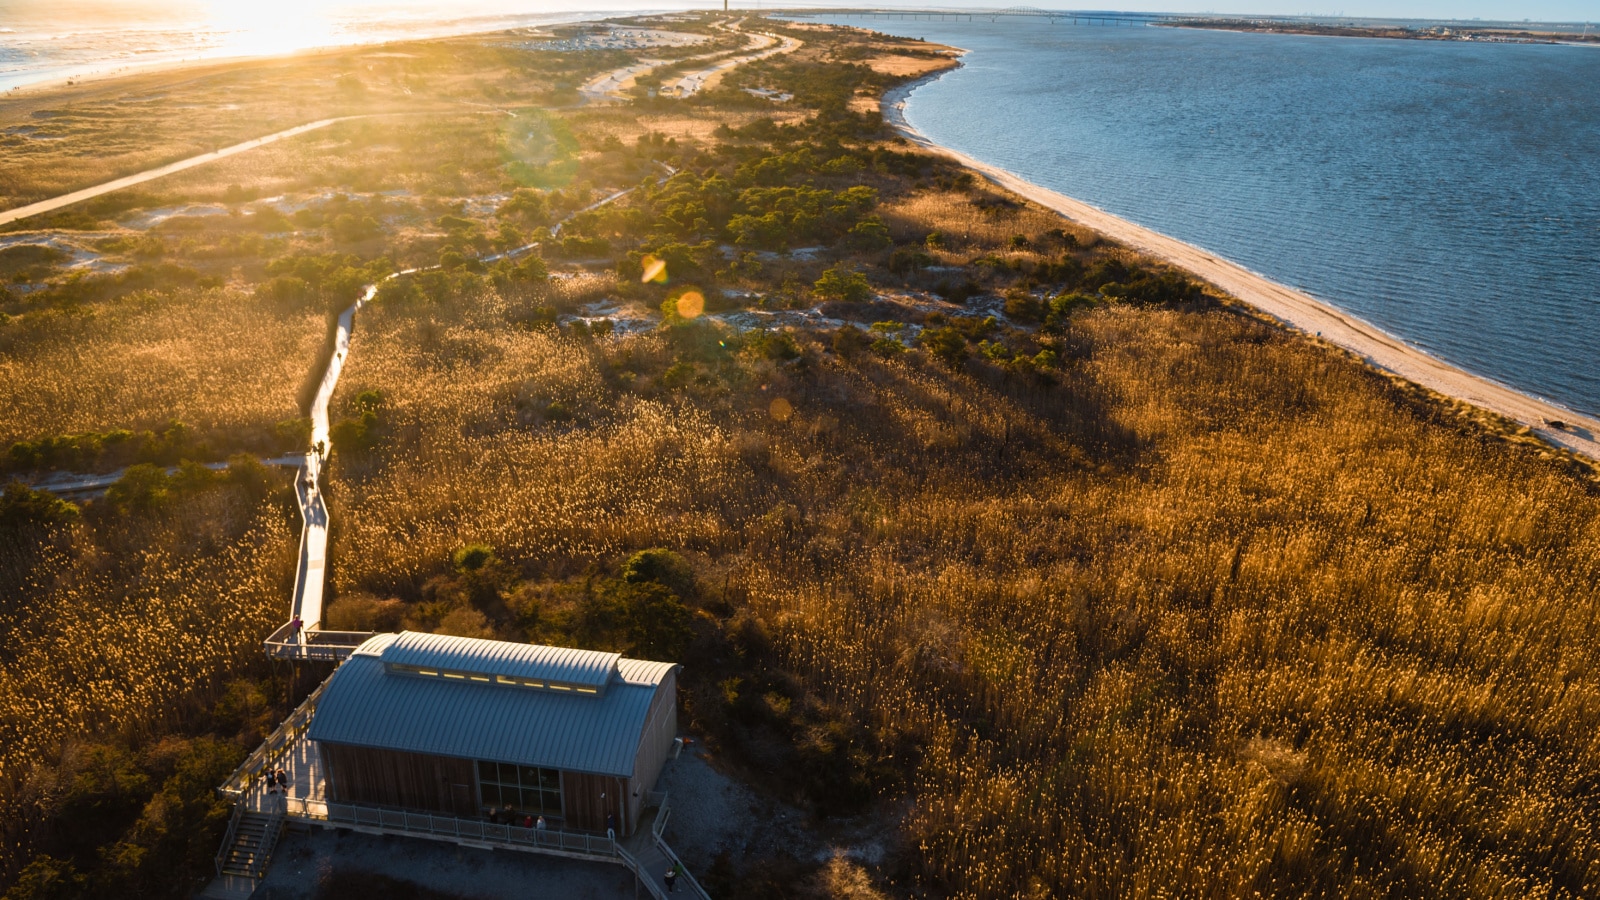 A gorgeous view of the Fire Island, New York, with a walking pier in the reeds. Captured on the top of the historic Fire Island Lighthouse.